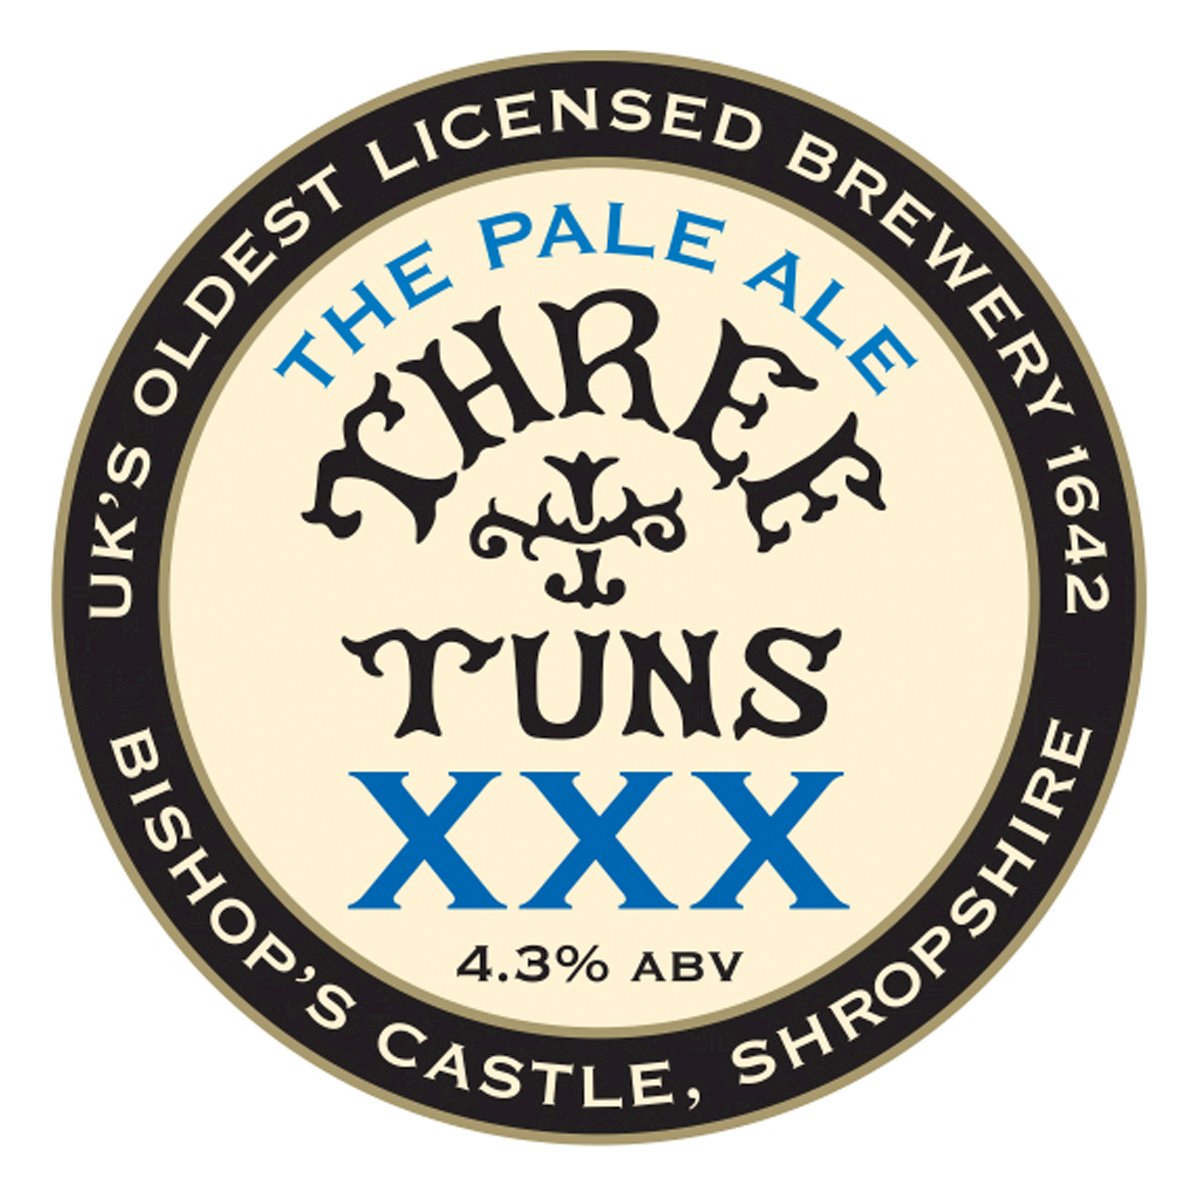 Three Tuns Brewery XXX 9 Gallons Pale   4.3%